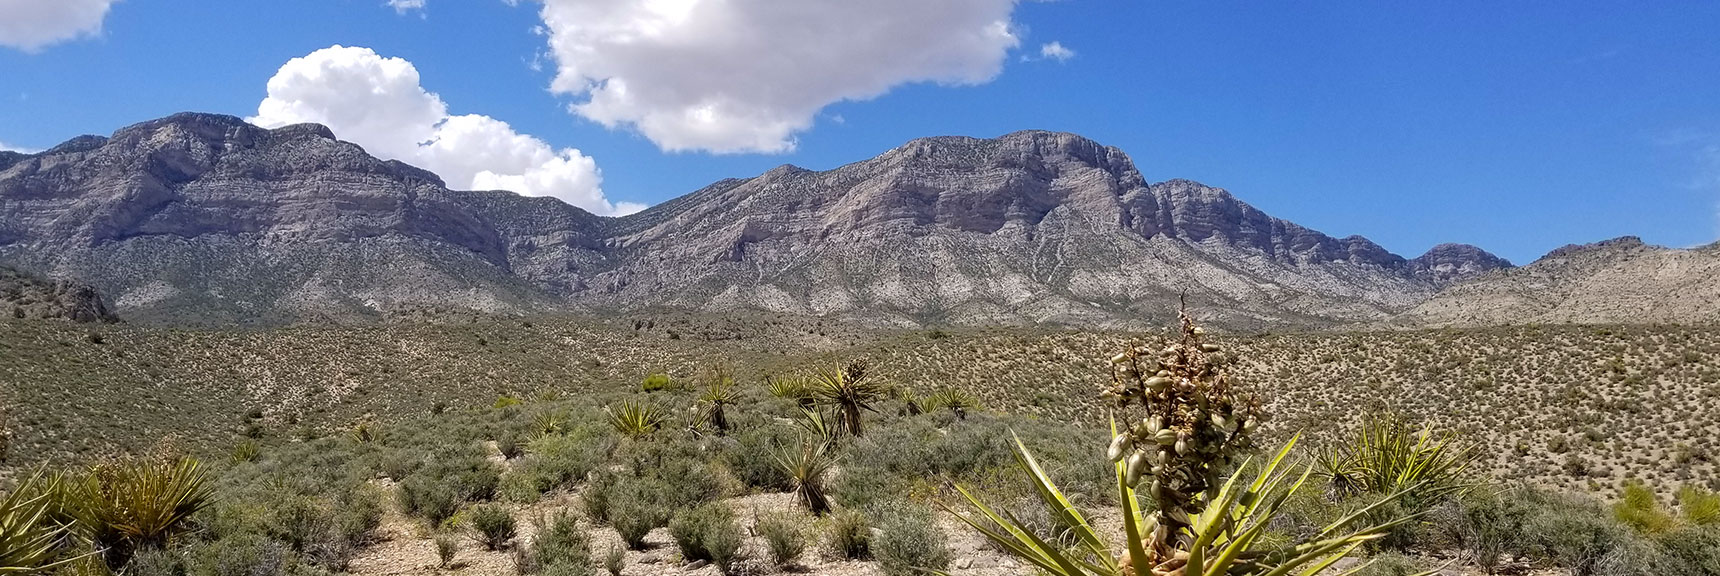 Red Rock National Park View of La Madre Mountain from Top of Scenic Drive